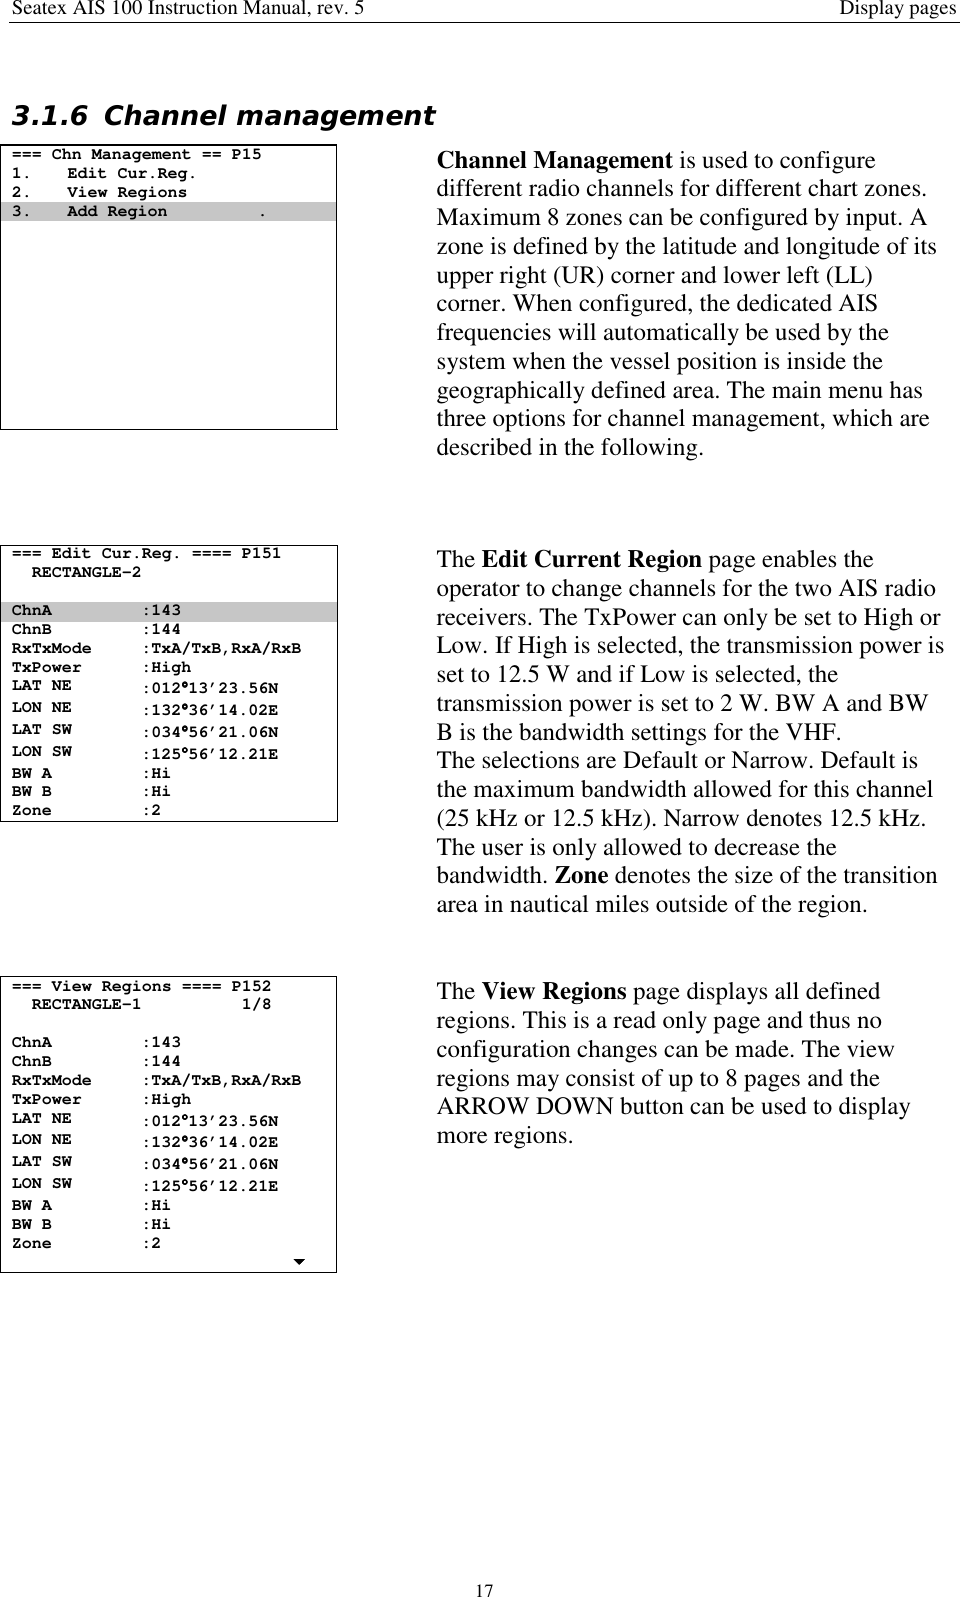 Seatex AIS 100 Instruction Manual, rev. 5 Display pages173.1.6 Channel management=== Chn Management == P151. Edit Cur.Reg.2. View Regions3. Add Region .Channel Management is used to configuredifferent radio channels for different chart zones.Maximum 8 zones can be configured by input. Azone is defined by the latitude and longitude of itsupper right (UR) corner and lower left (LL)corner. When configured, the dedicated AISfrequencies will automatically be used by thesystem when the vessel position is inside thegeographically defined area. The main menu hasthree options for channel management, which aredescribed in the following.=== Edit Cur.Reg. ==== P151RECTANGLE-2ChnA :143ChnB :144RxTxMode :TxA/TxB,RxA/RxBTxPower :HighLAT NE :012°°°°13’23.56NLON NE :132°°°°36’14.02ELAT SW :034°°°°56’21.06NLON SW :125°°°°56’12.21EBW A :HiBW B :HiZone :2The Edit Current Region page enables theoperator to change channels for the two AIS radioreceivers. The TxPower can only be set to High orLow. If High is selected, the transmission power isset to 12.5 W and if Low is selected, thetransmission power is set to 2 W. BW A and BWB is the bandwidth settings for the VHF.The selections are Default or Narrow. Default isthe maximum bandwidth allowed for this channel(25 kHz or 12.5 kHz). Narrow denotes 12.5 kHz.The user is only allowed to decrease thebandwidth. Zone denotes the size of the transitionarea in nautical miles outside of the region.=== View Regions ==== P152RECTANGLE-1 1/8ChnA :143ChnB :144RxTxMode :TxA/TxB,RxA/RxBTxPower :HighLAT NE :012°°°°13’23.56NLON NE :132°°°°36’14.02ELAT SW :034°°°°56’21.06NLON SW :125°°°°56’12.21EBW A :HiBW B :HiZone :2The View Regions page displays all definedregions. This is a read only page and thus noconfiguration changes can be made. The viewregions may consist of up to 8 pages and theARROW DOWN button can be used to displaymore regions.